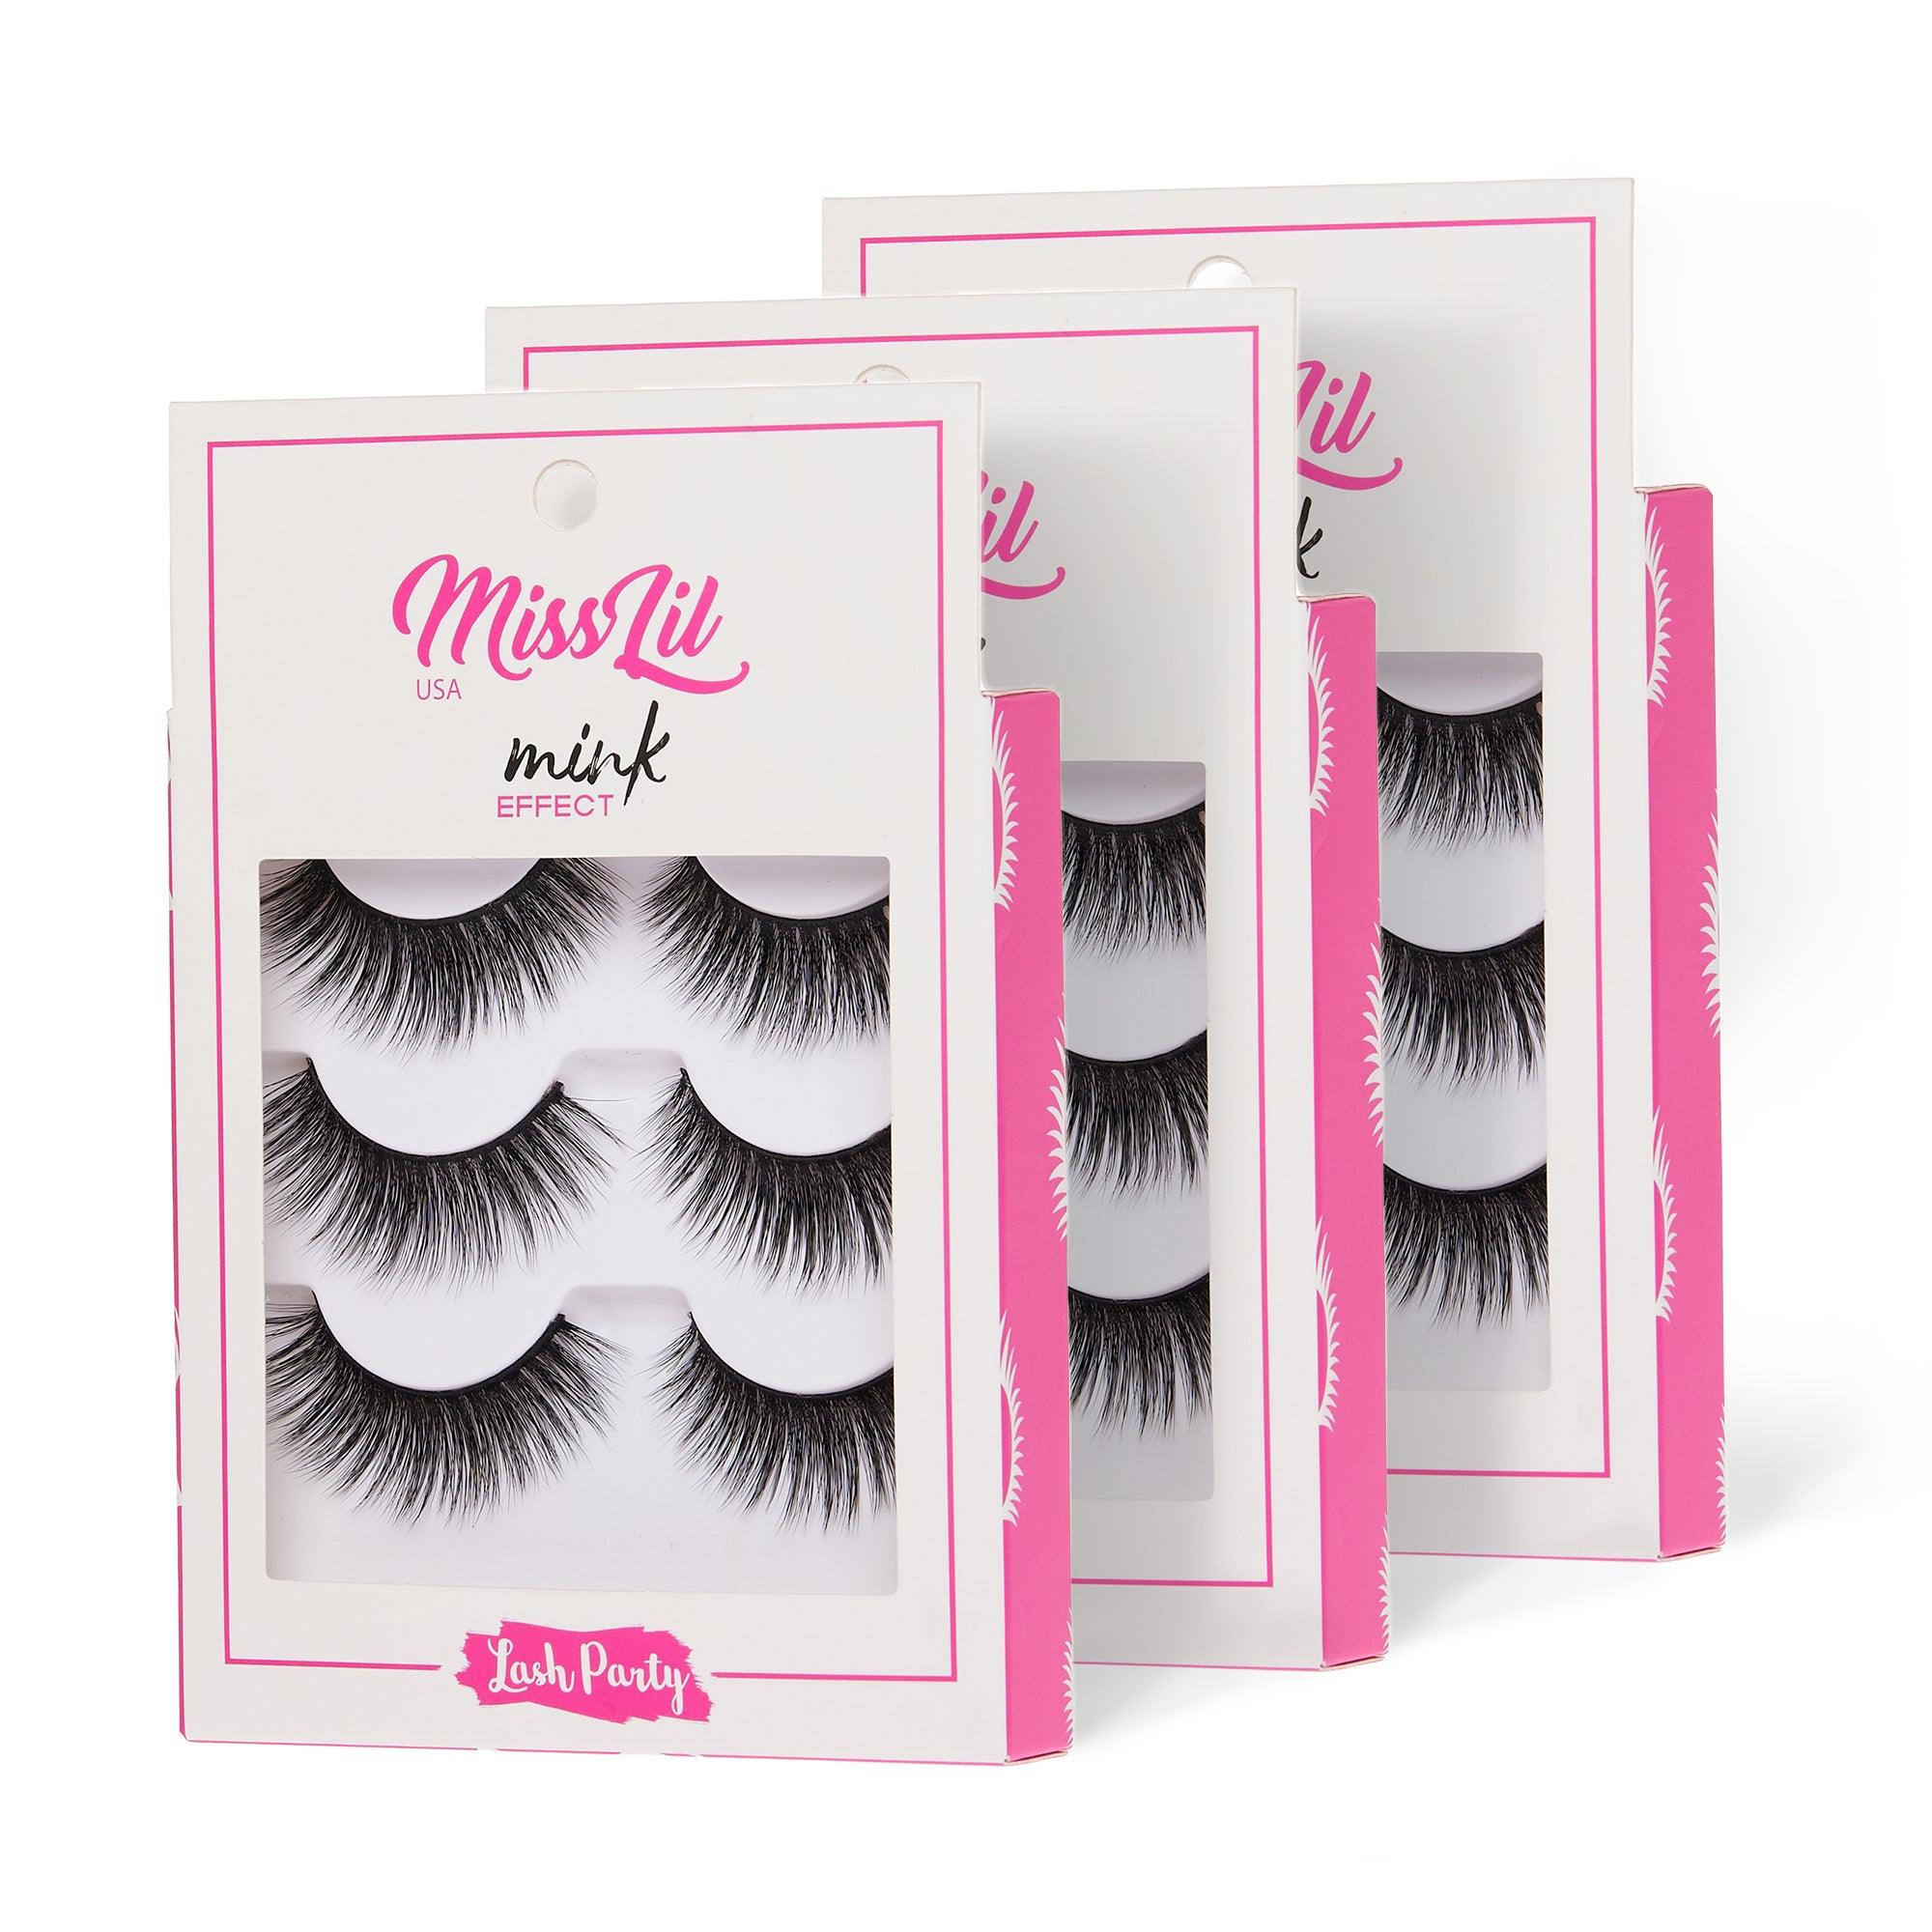 3-Pair Faux Mink Effect Eyelashes - Lash Party Collection #5 - Pack of 3 - Miss Lil USA